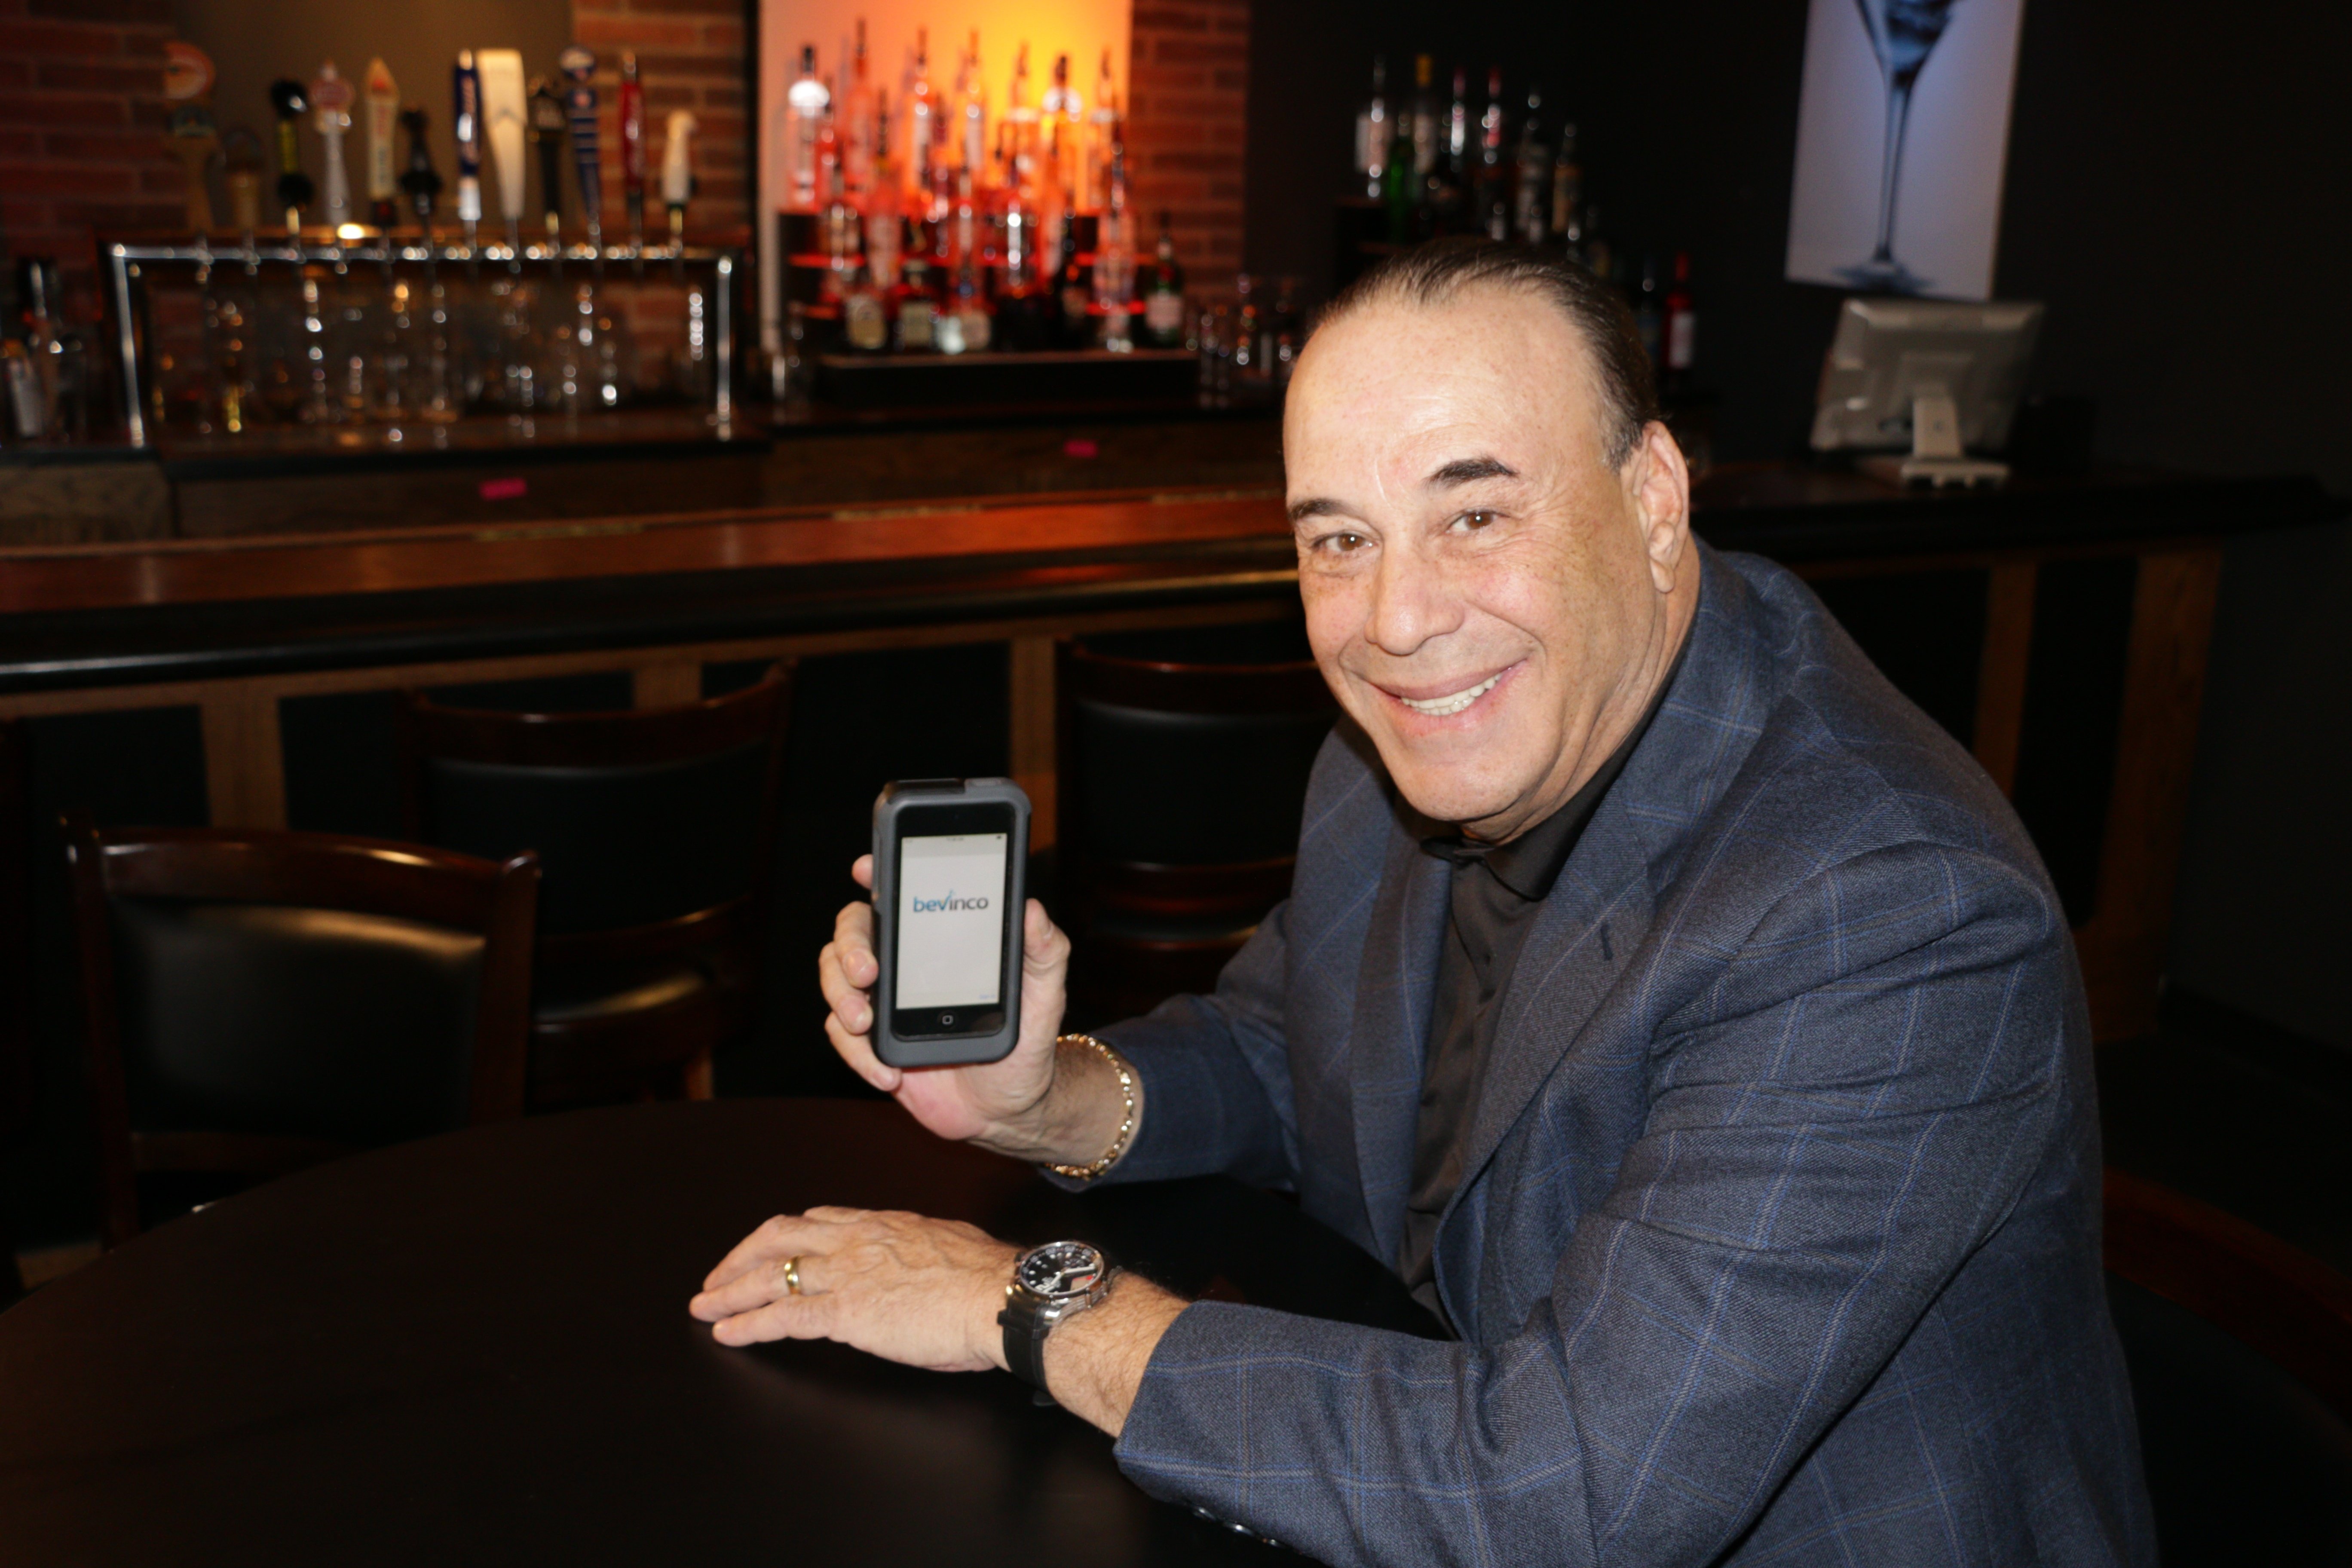 Jersey City bar owner reflects on being featured on 'Bar Rescue